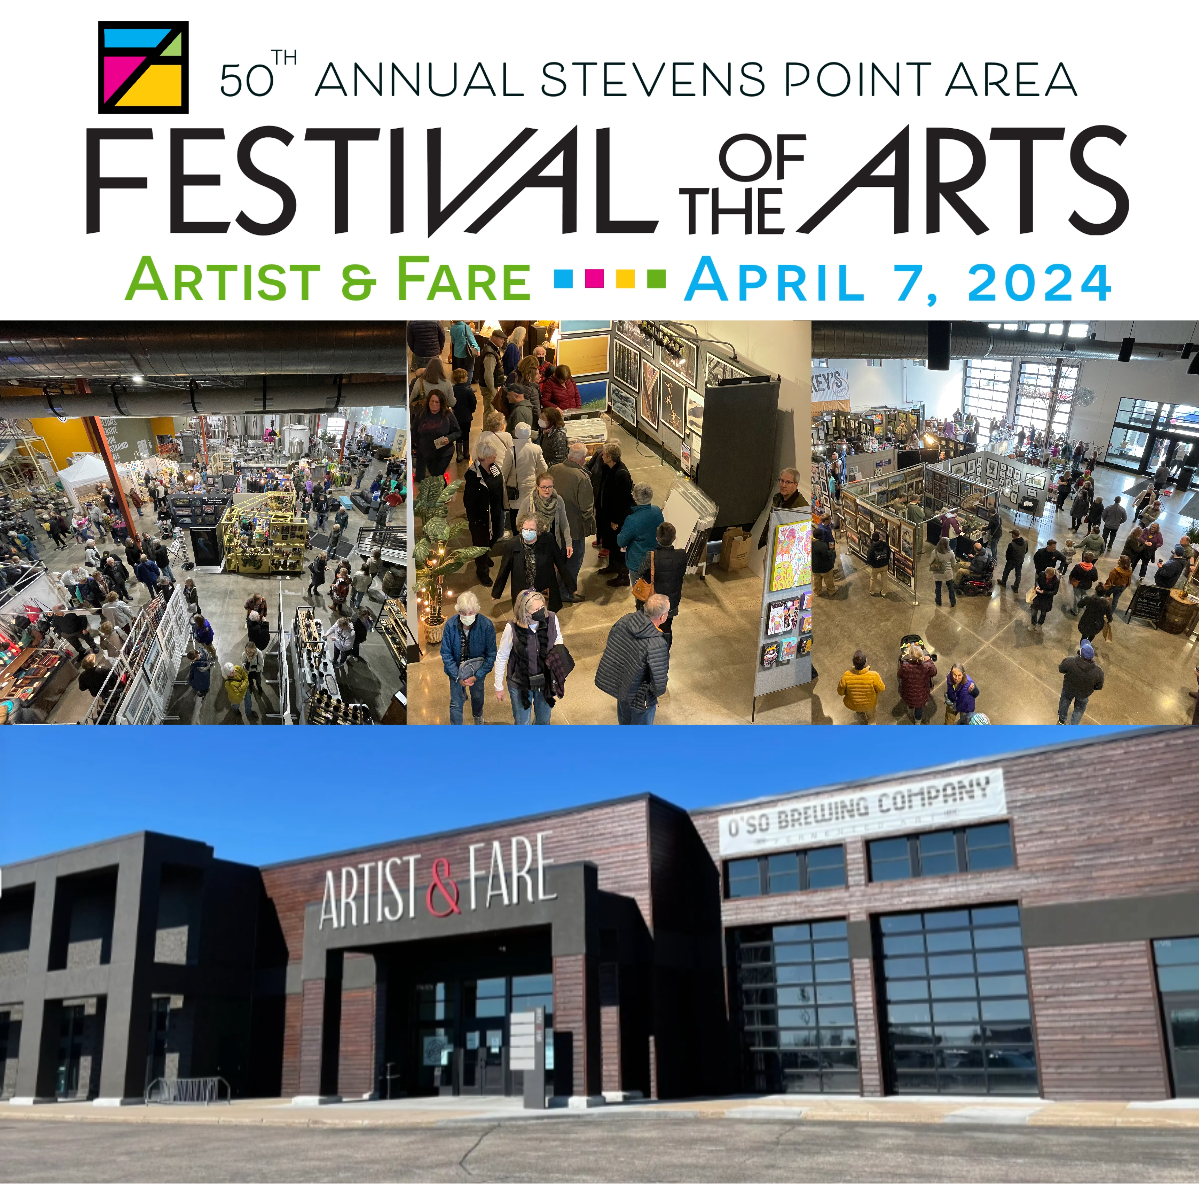 ZAPP - Event Information - Stevens Point Area Festival of the Arts 2024